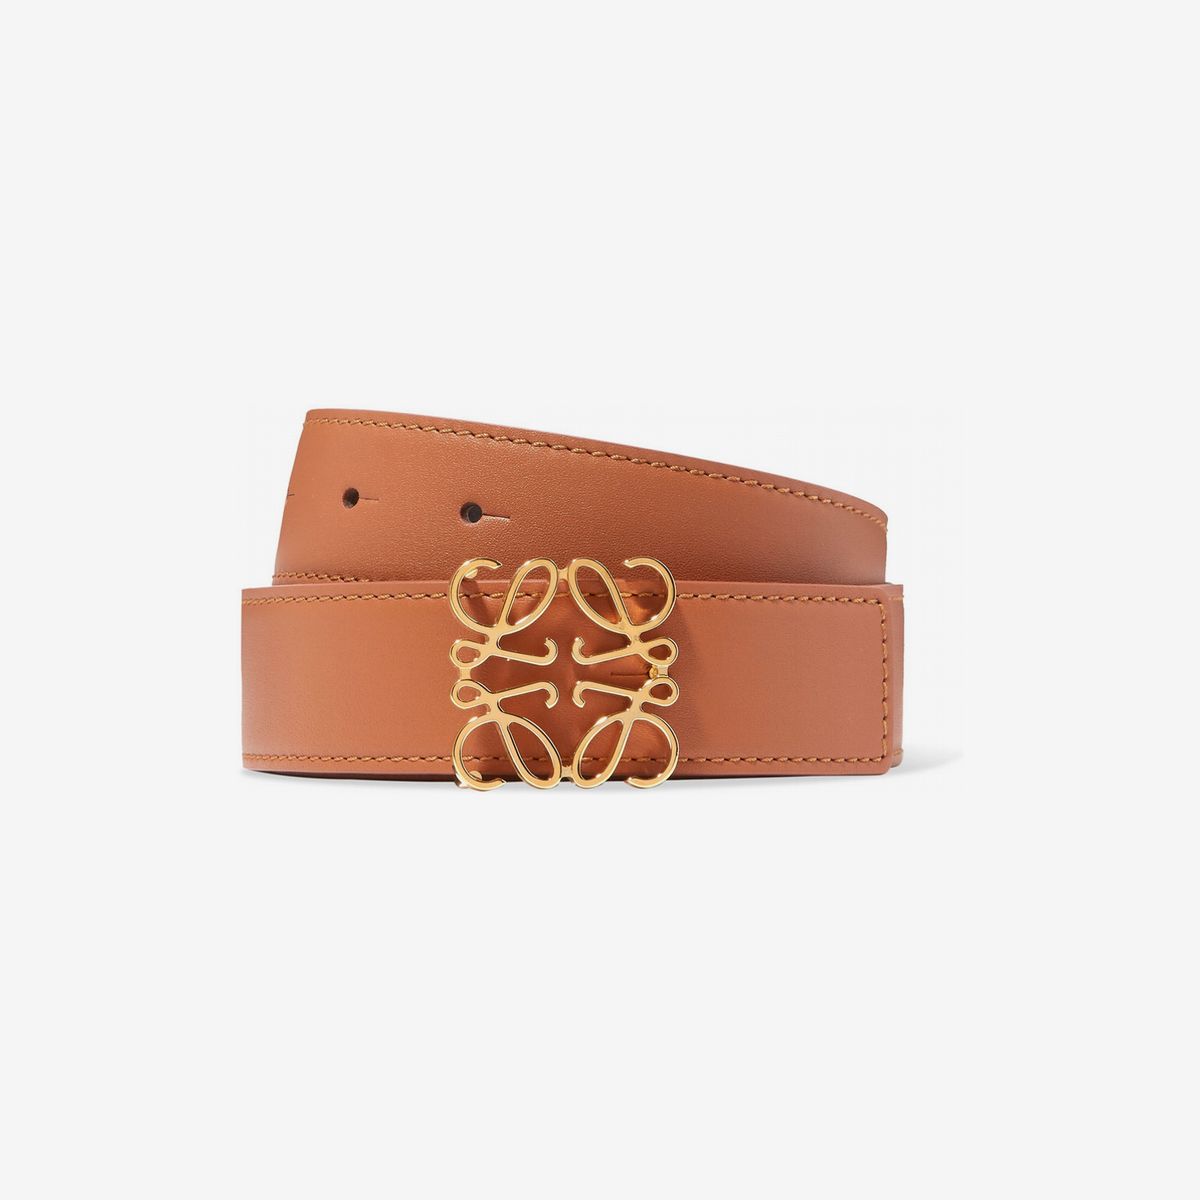 New Women's All Brown Belt Size Large Brand New! 